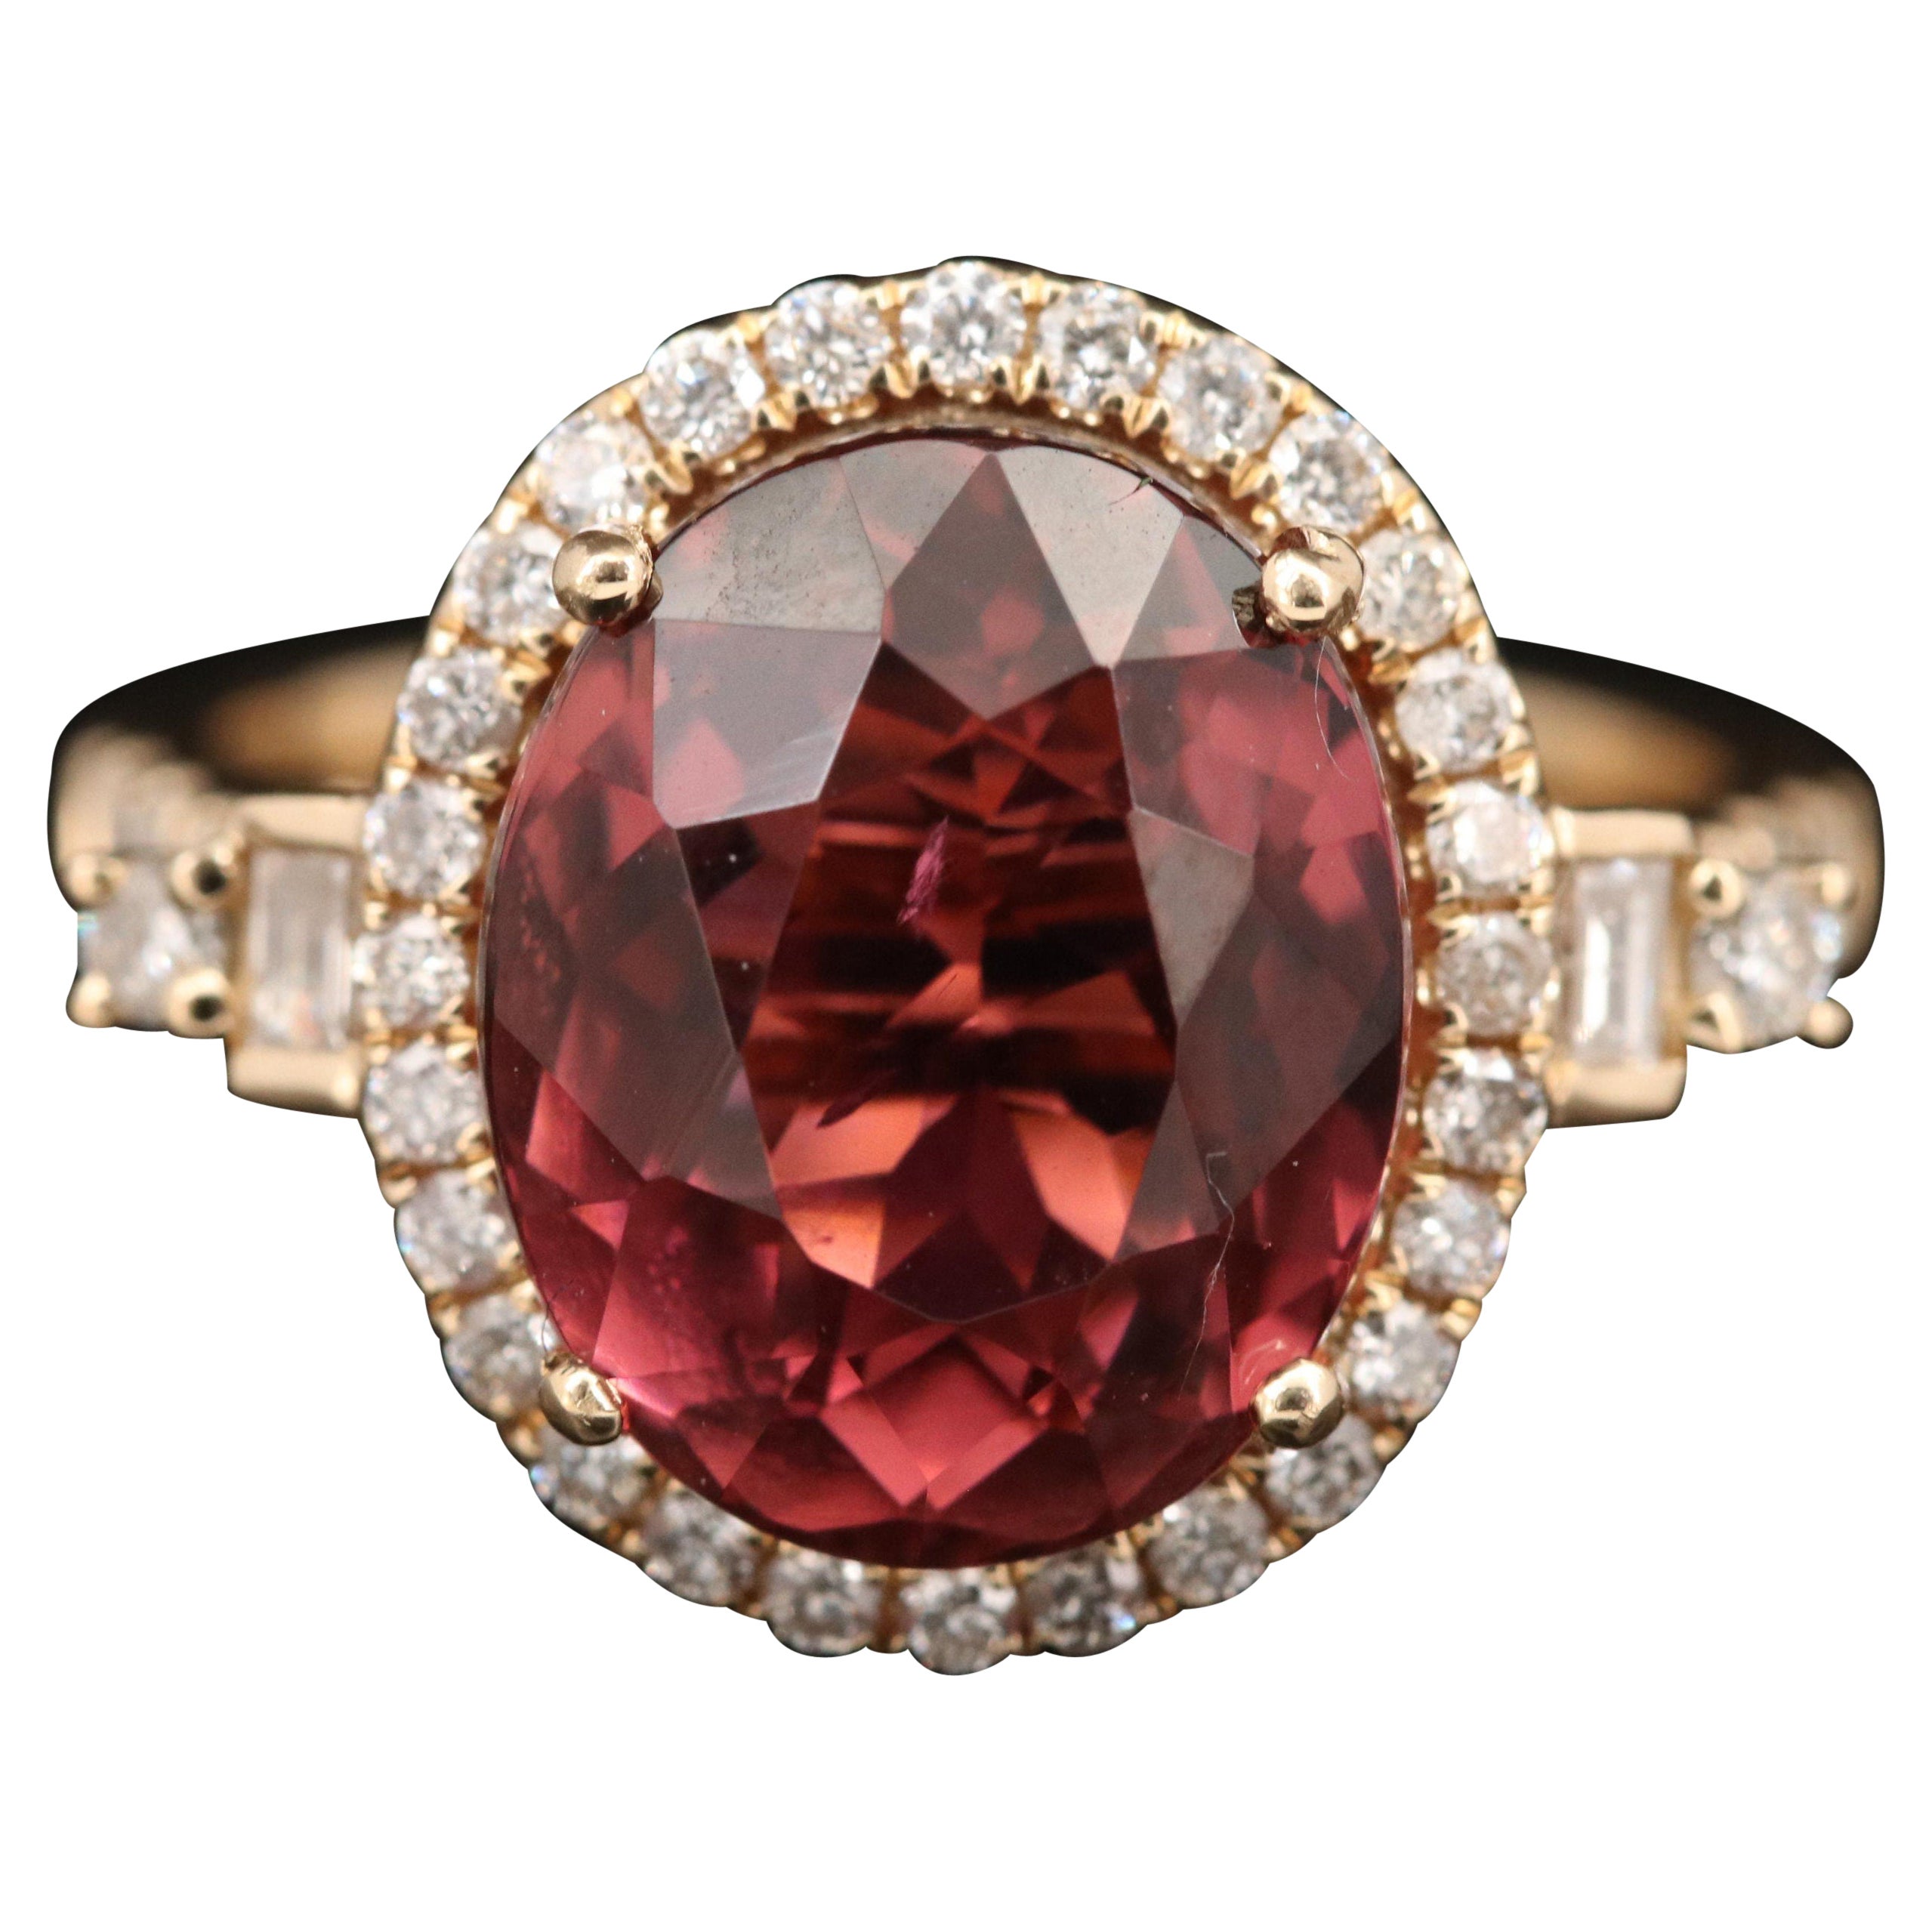 For Sale:  6.3 Carat Oval Cut Rubellite Tourmaline Bridal Promise Ring Halo Tourmaline Ring